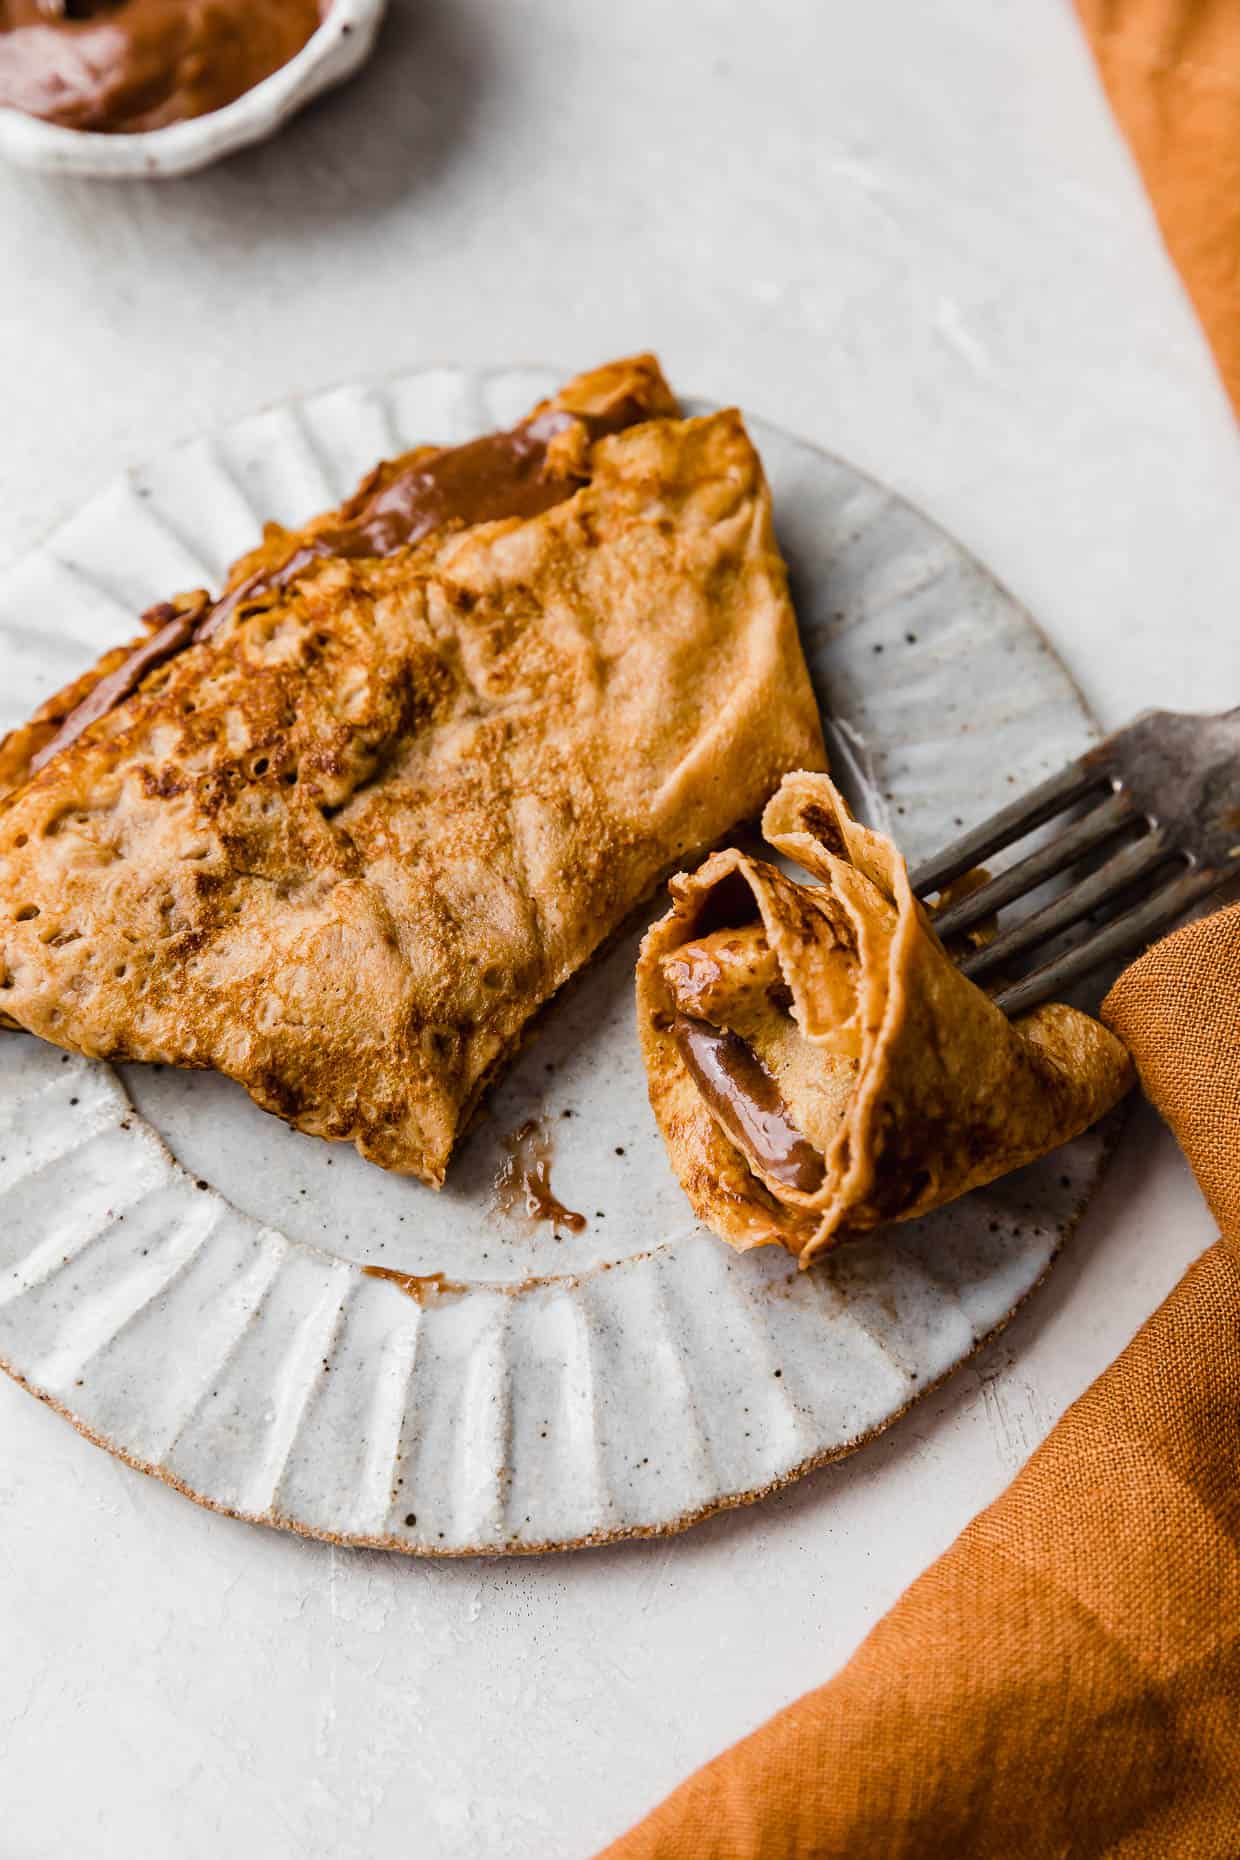 A Pumpkin Crepe filled with nutella whipped cream, cut into.